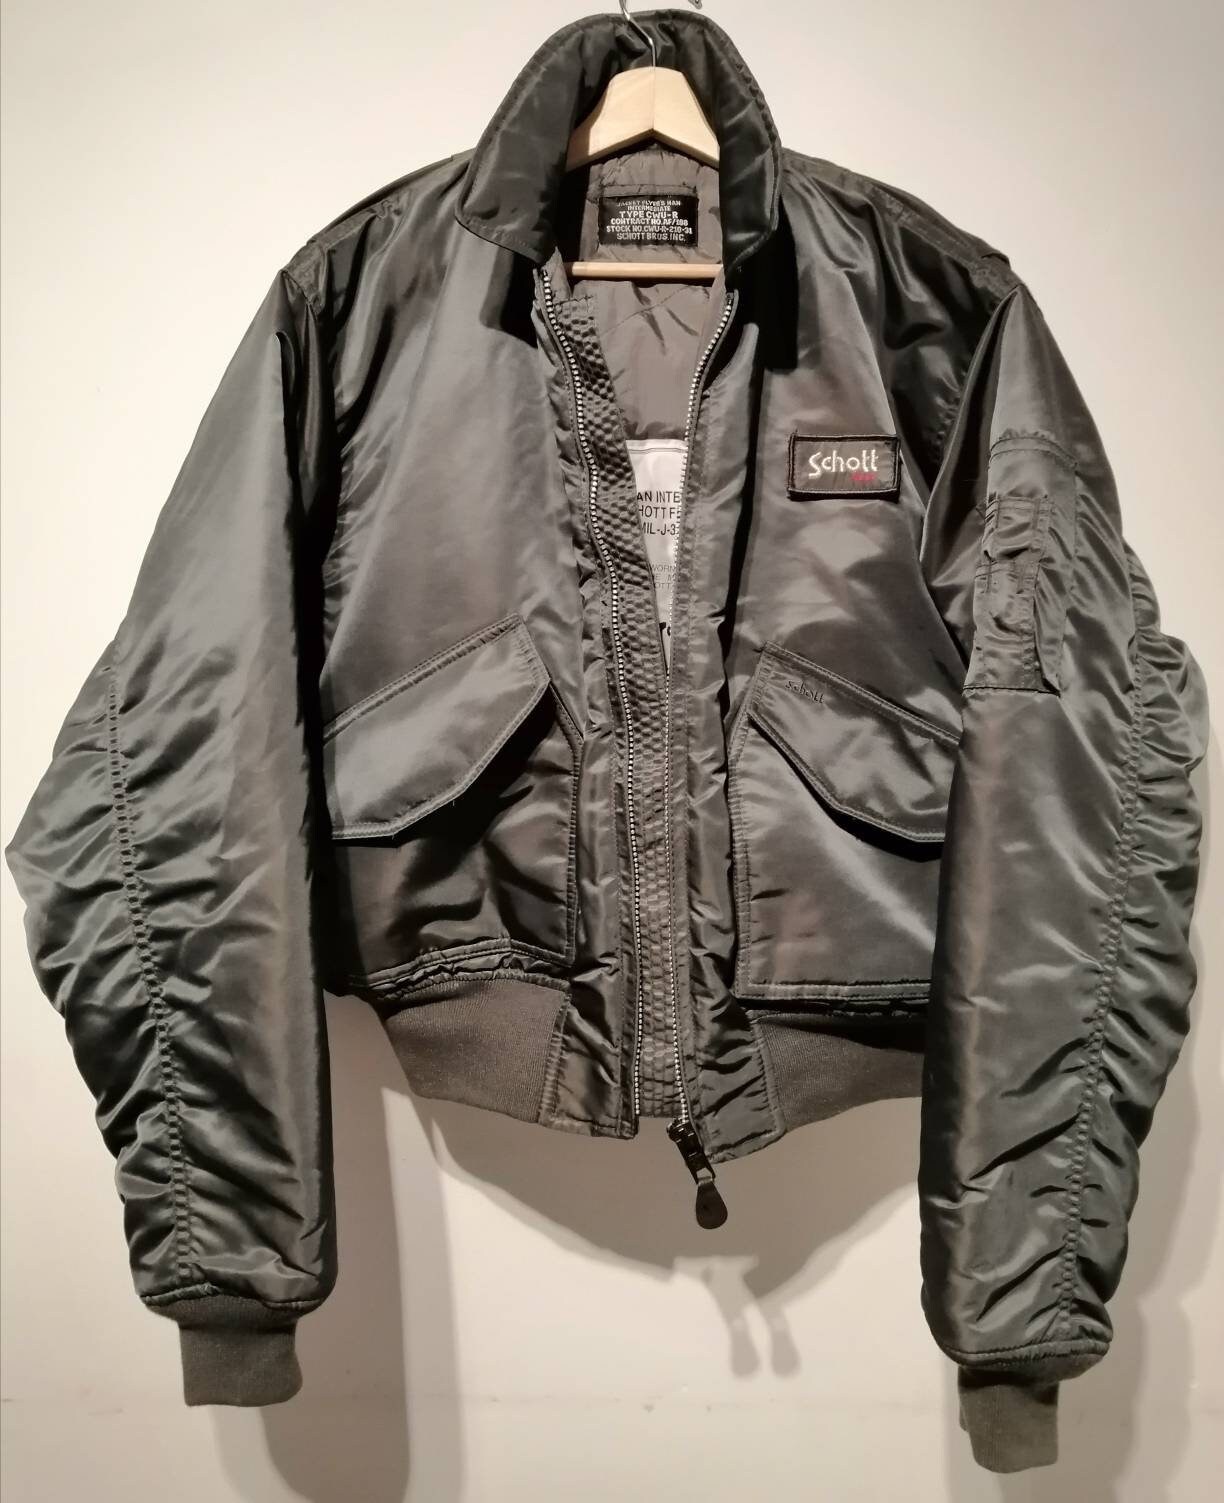 SECOND HAND Mythical Schott Flight Bomber Jacket From the 90s - Etsy